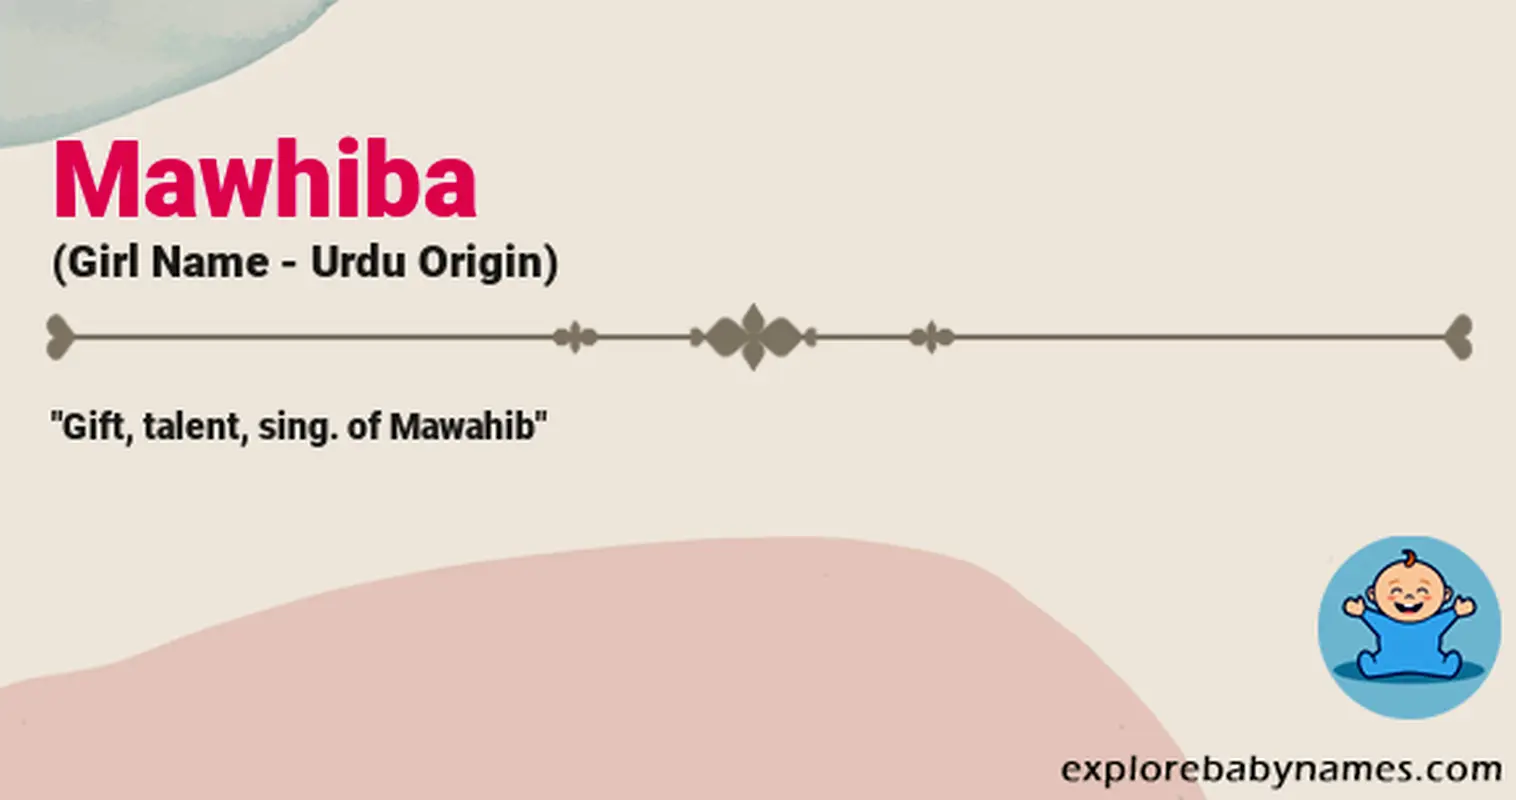 Meaning of Mawhiba